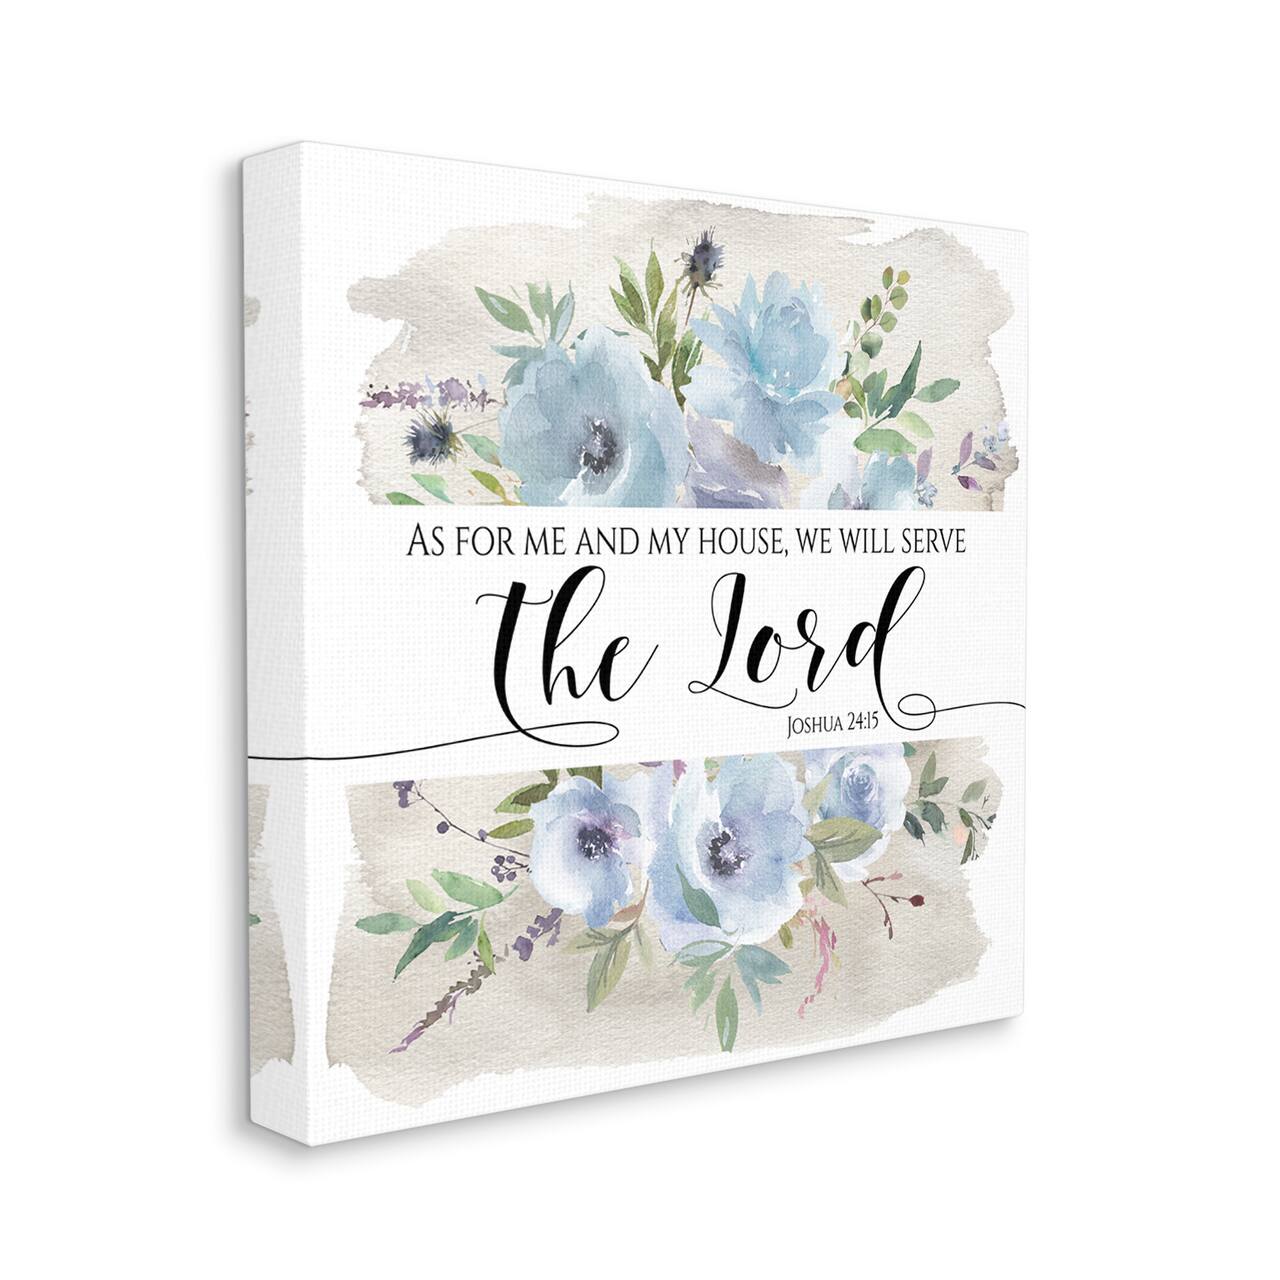 Stupell Industries Will Serve the Lord Joshua 24:15 Blue Florals Canvas Wall Art